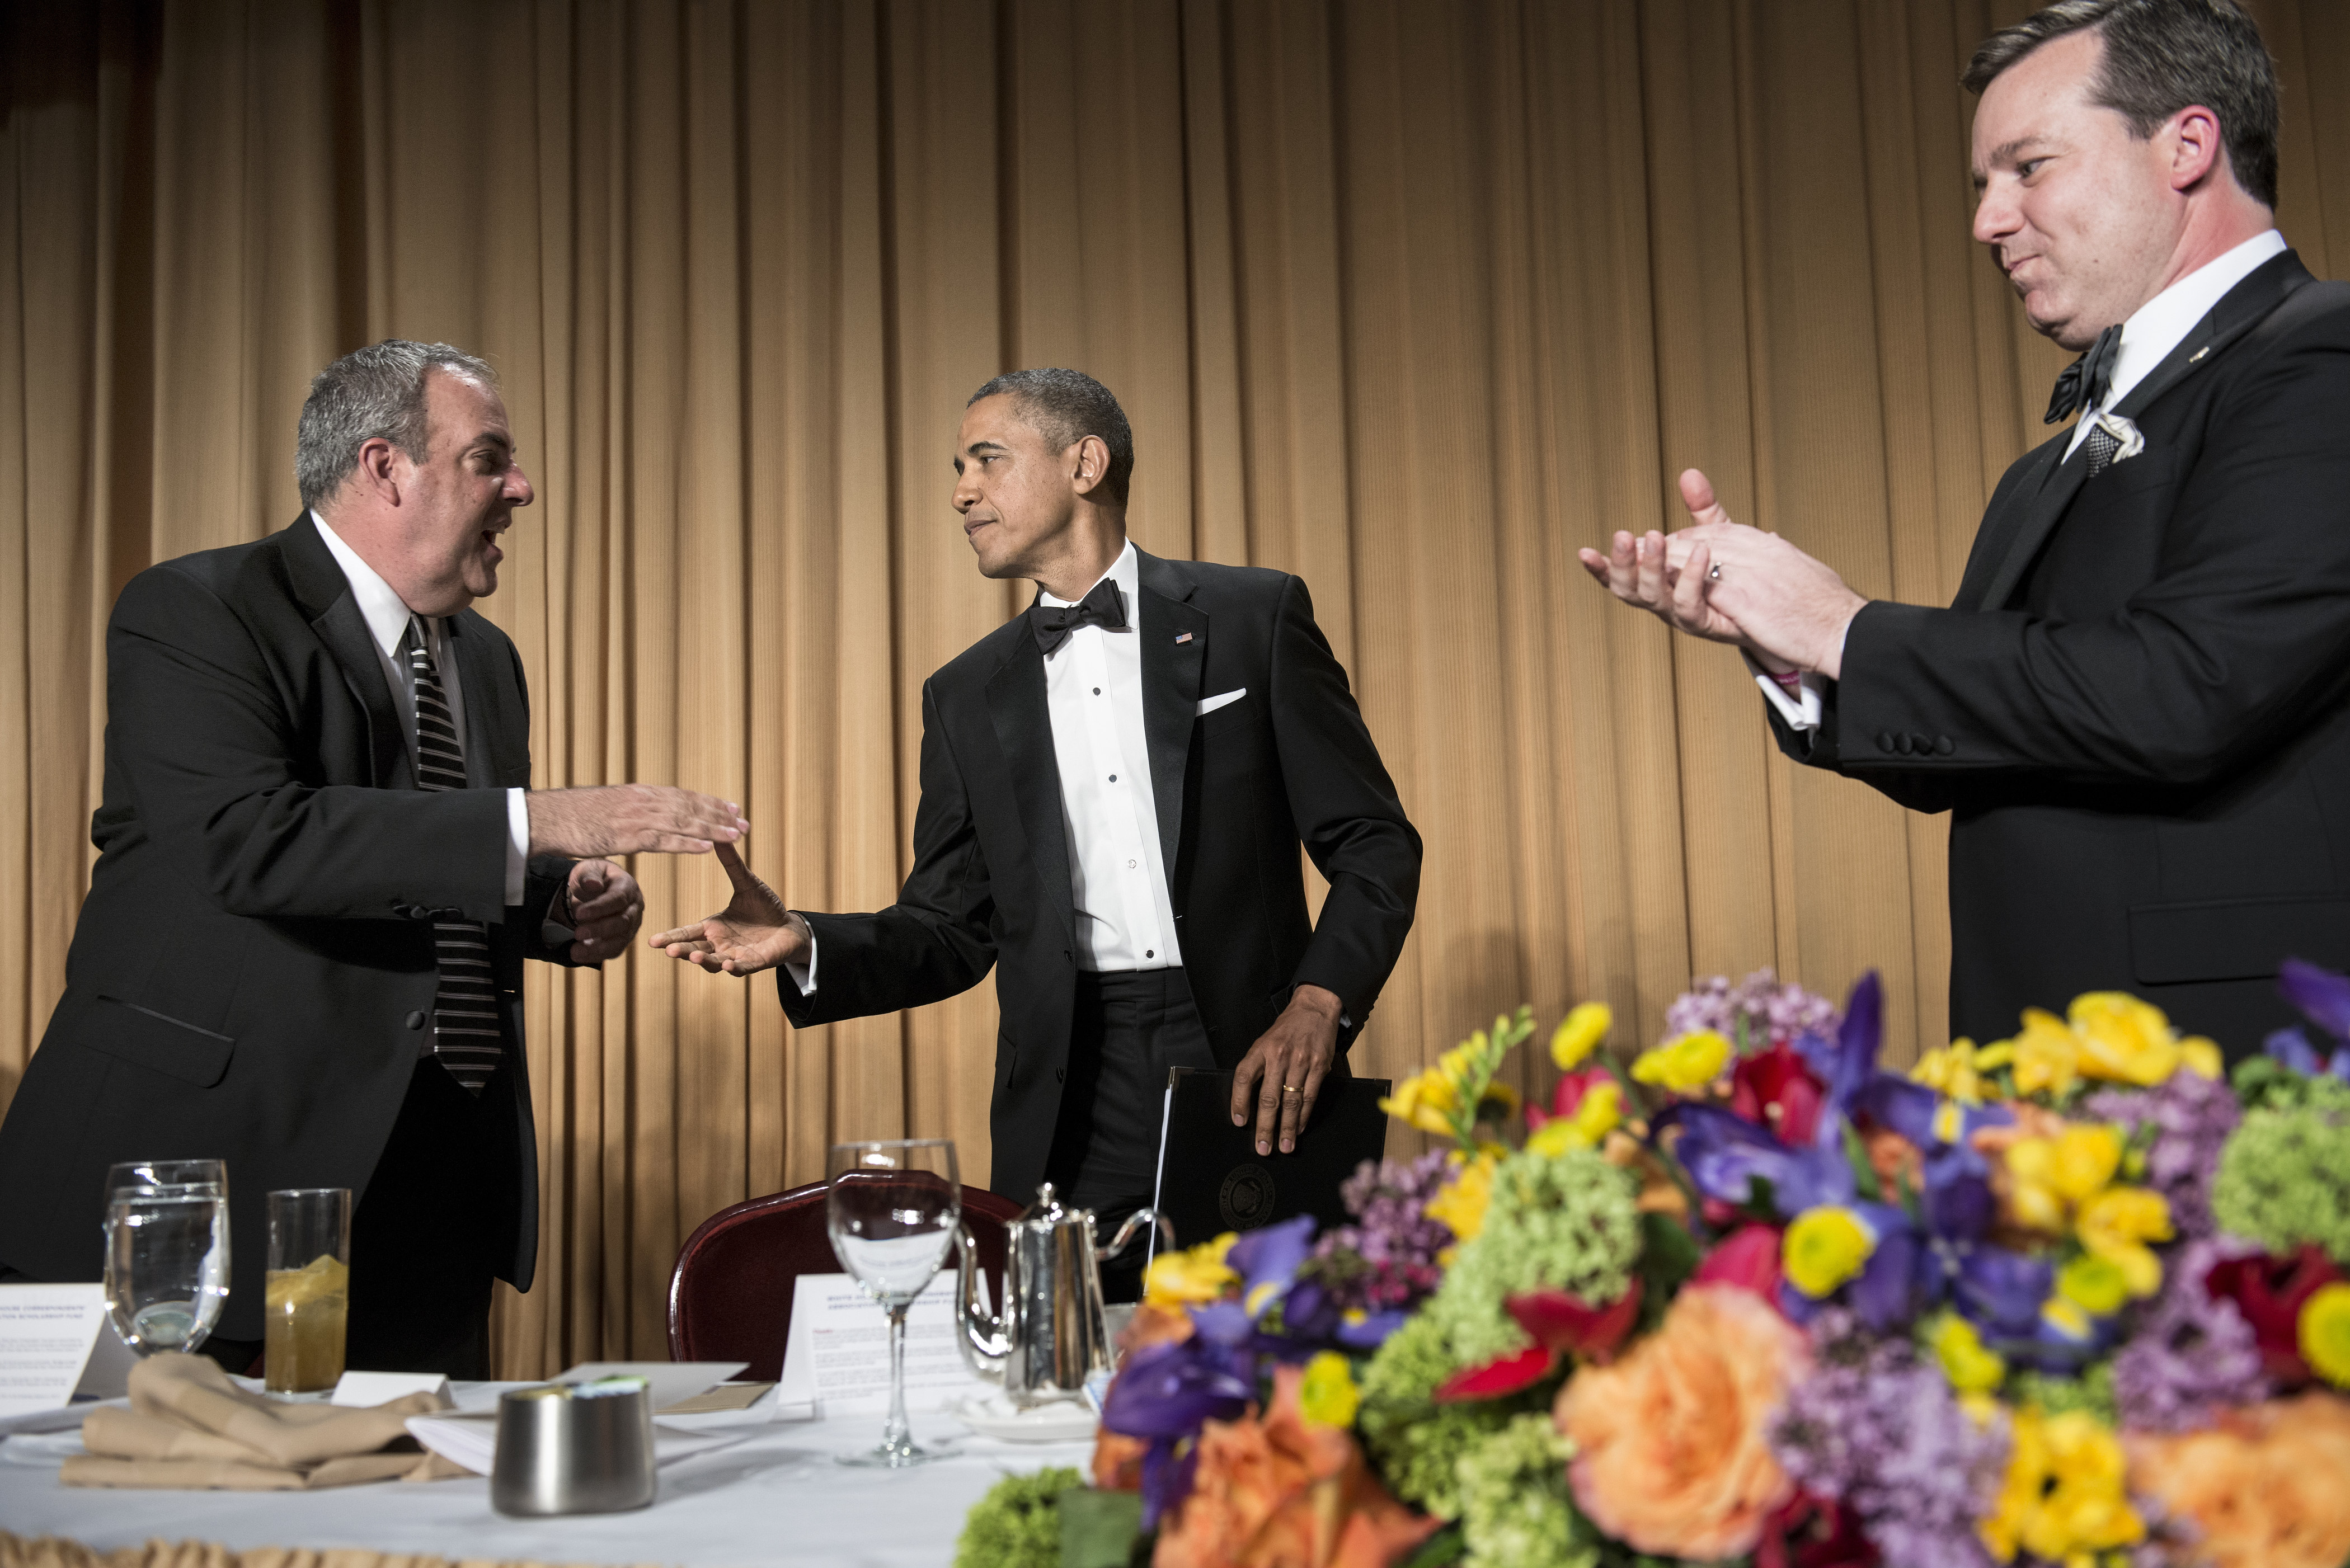 Former Fox News Vice President/current Newsmax TV CEO Michael Clemente shakes the hand of US President Barack Obama while Fox News correspondent Ed Henry watches during the White House Correspondents’ Association Dinner in 2013. (BRENDAN SMIALOWSKI/AFP/Getty Images)